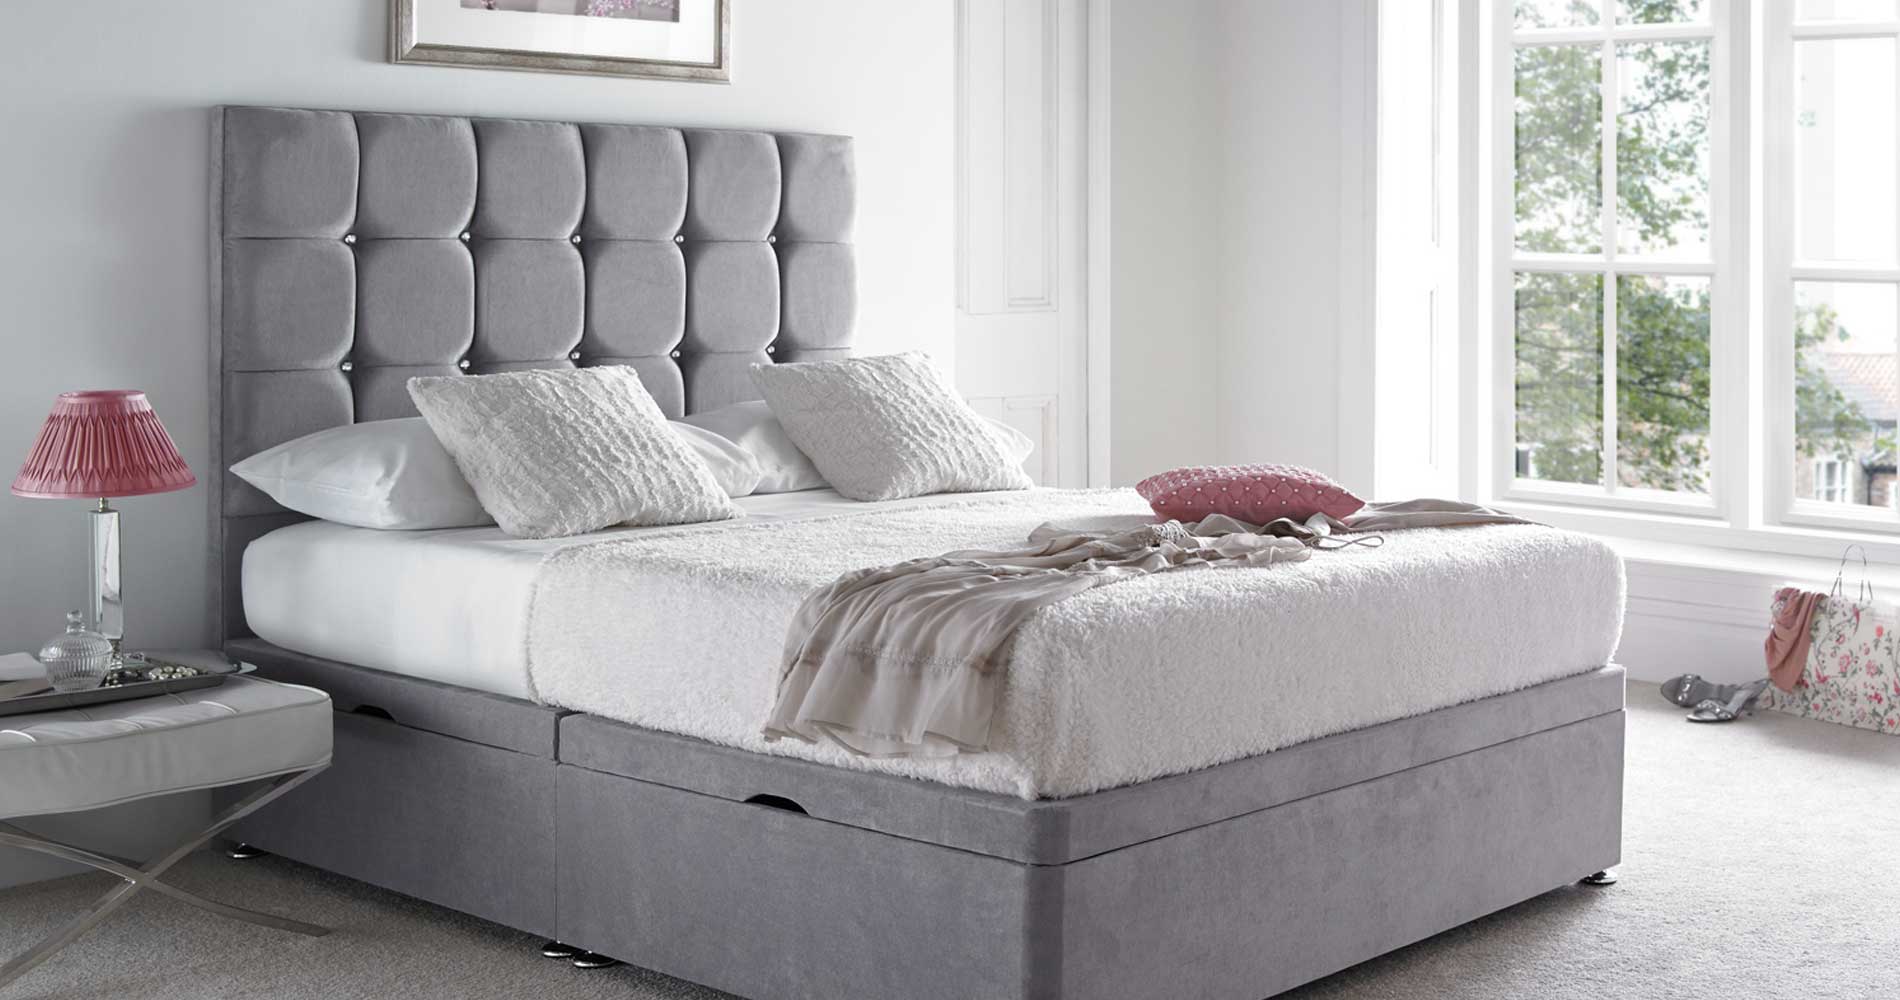 Diamante Beds | Crystal Beds